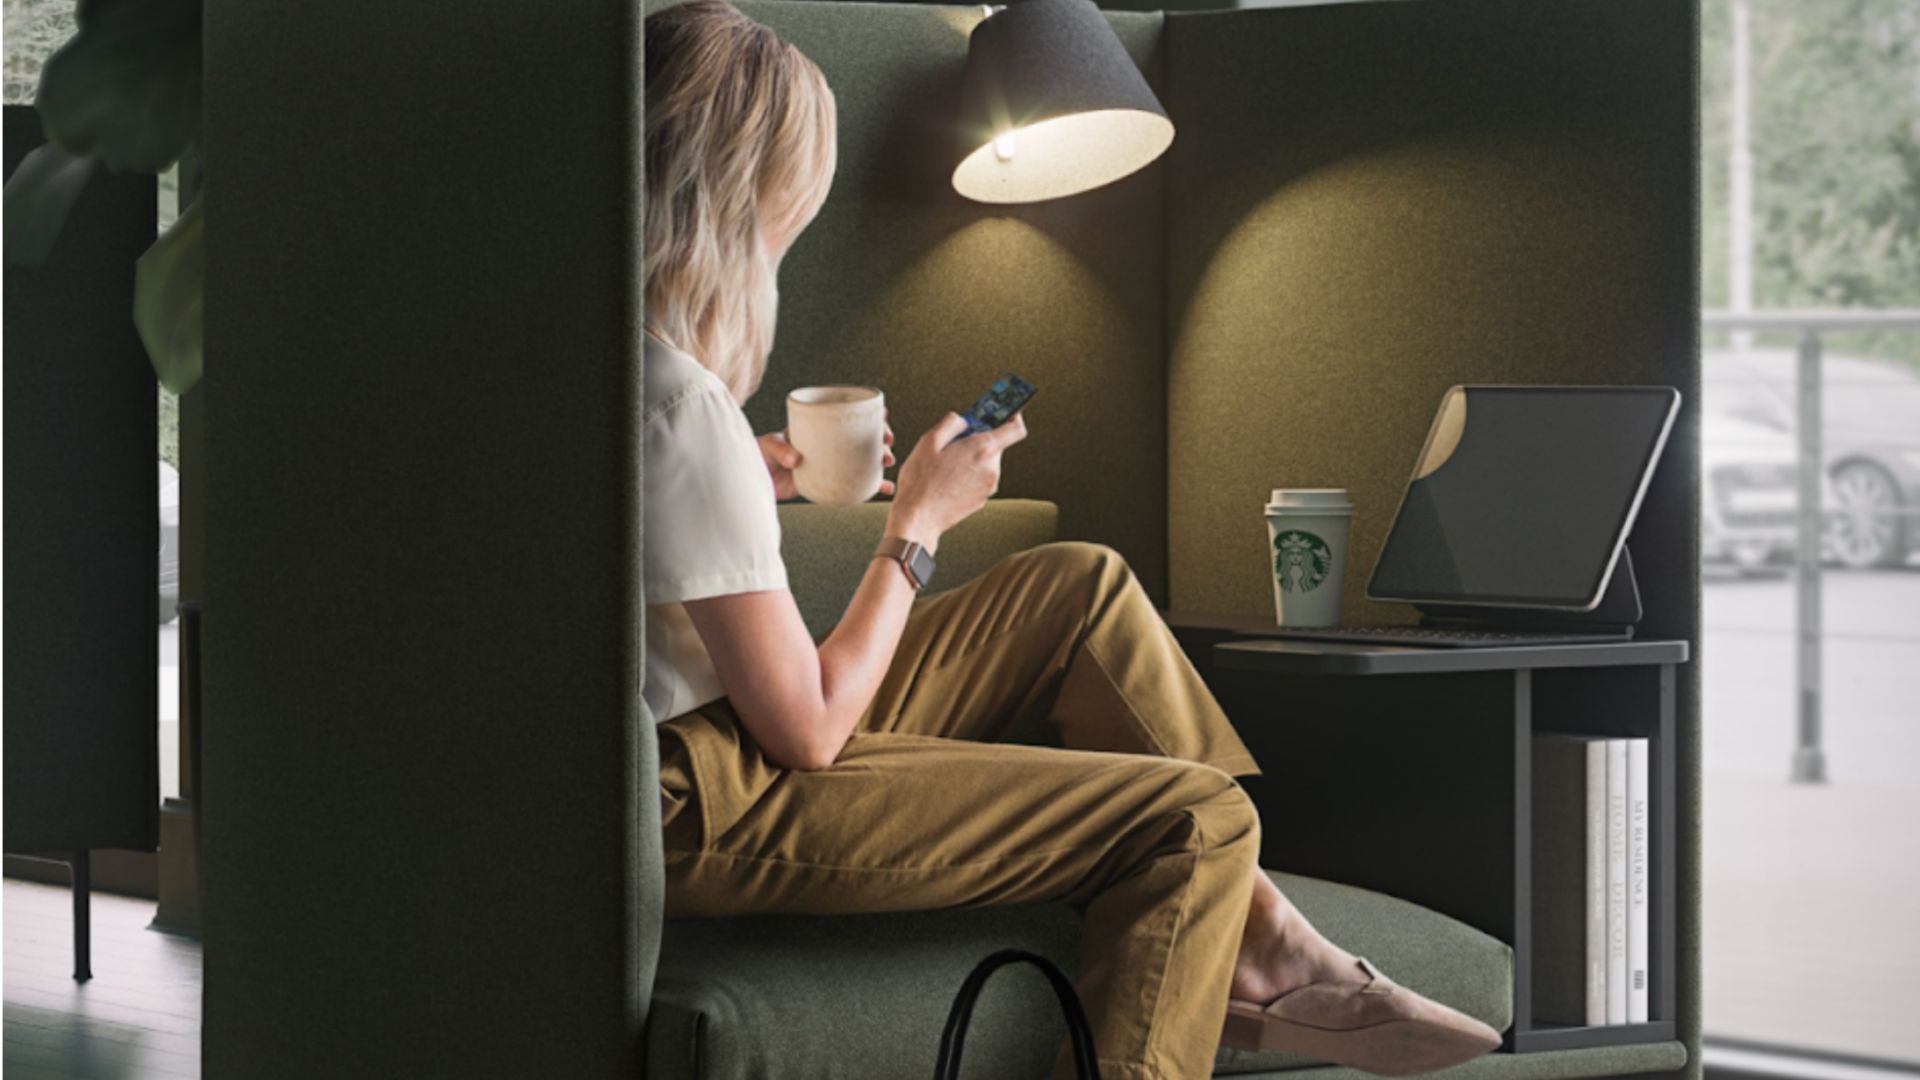 A customer relaxes in a modern café booth, sipping coffee and browsing on her smartphone, potentially engaging with interactive content such as quizzes and polls next to a laptop and a Starbucks cup.